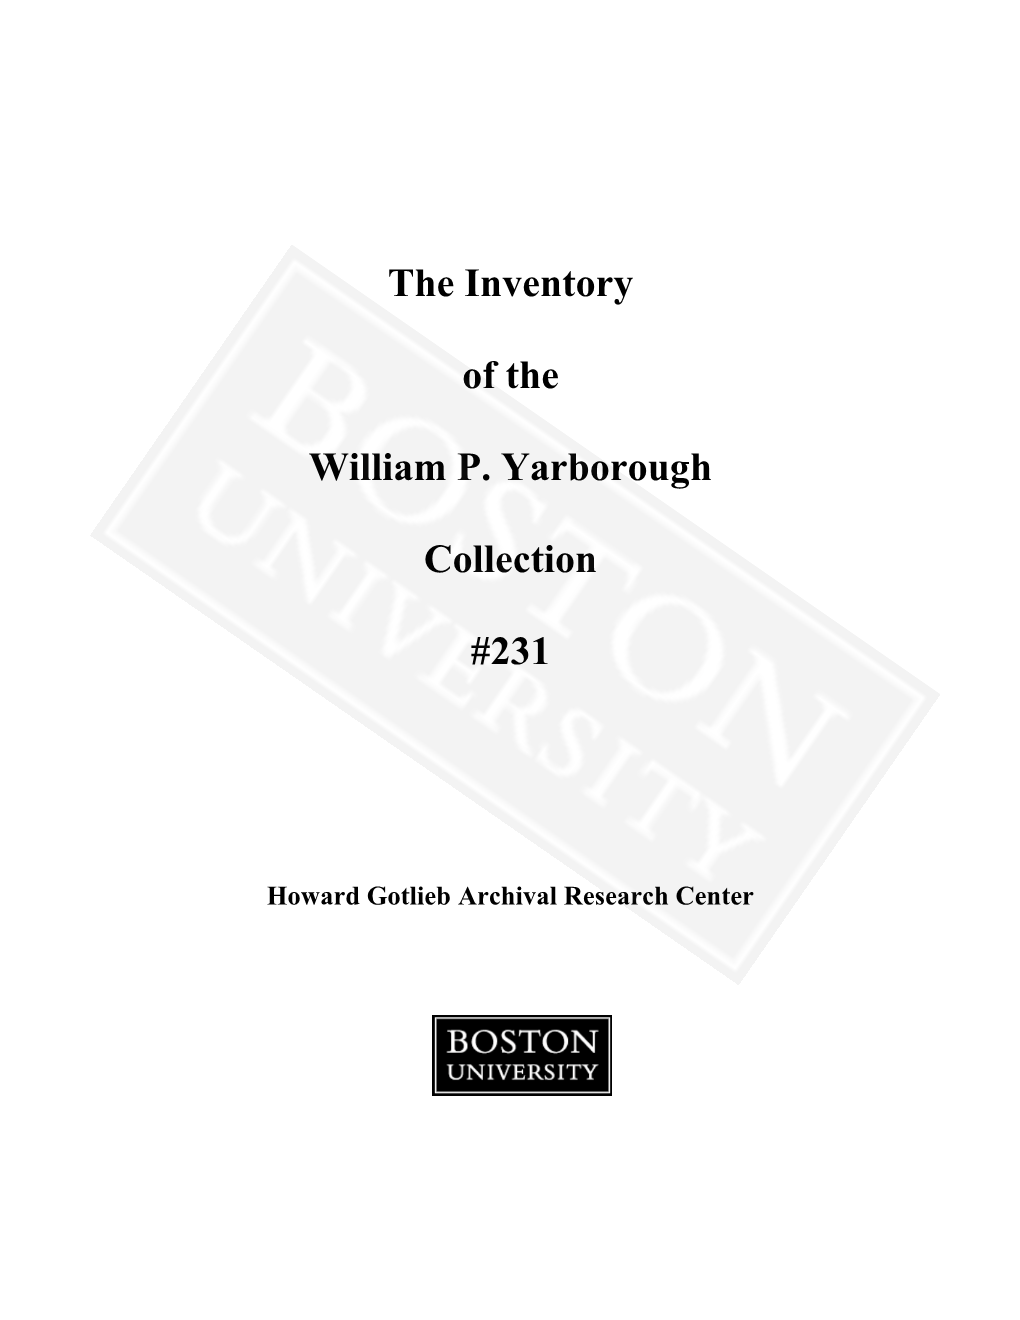 The Inventory of the William P. Yarborough Collection #231